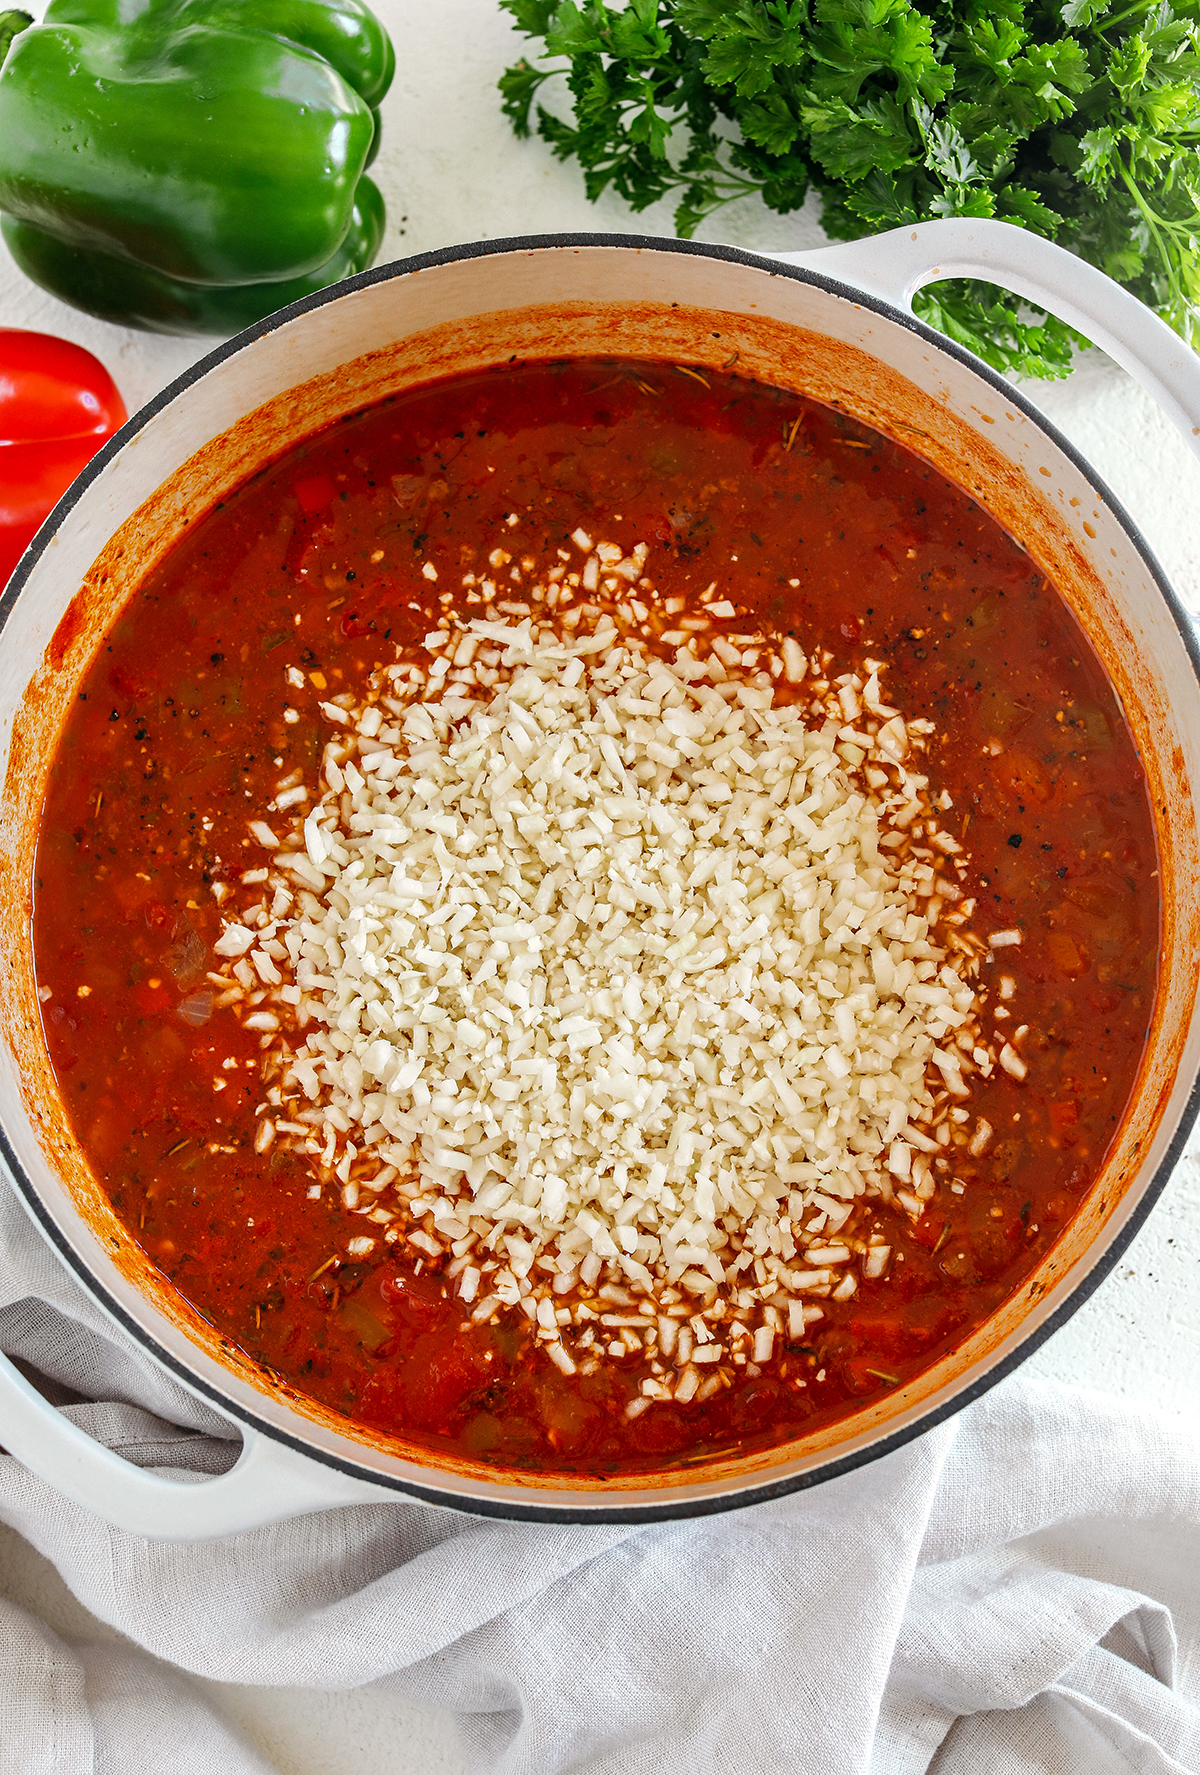 This hearty Stuffed Pepper Soup is loaded with seasoned ground beef, colorful bell peppers, onion and cauliflower rice all simmered in a flavorful broth for a delicious one pot meal the whole family will love!